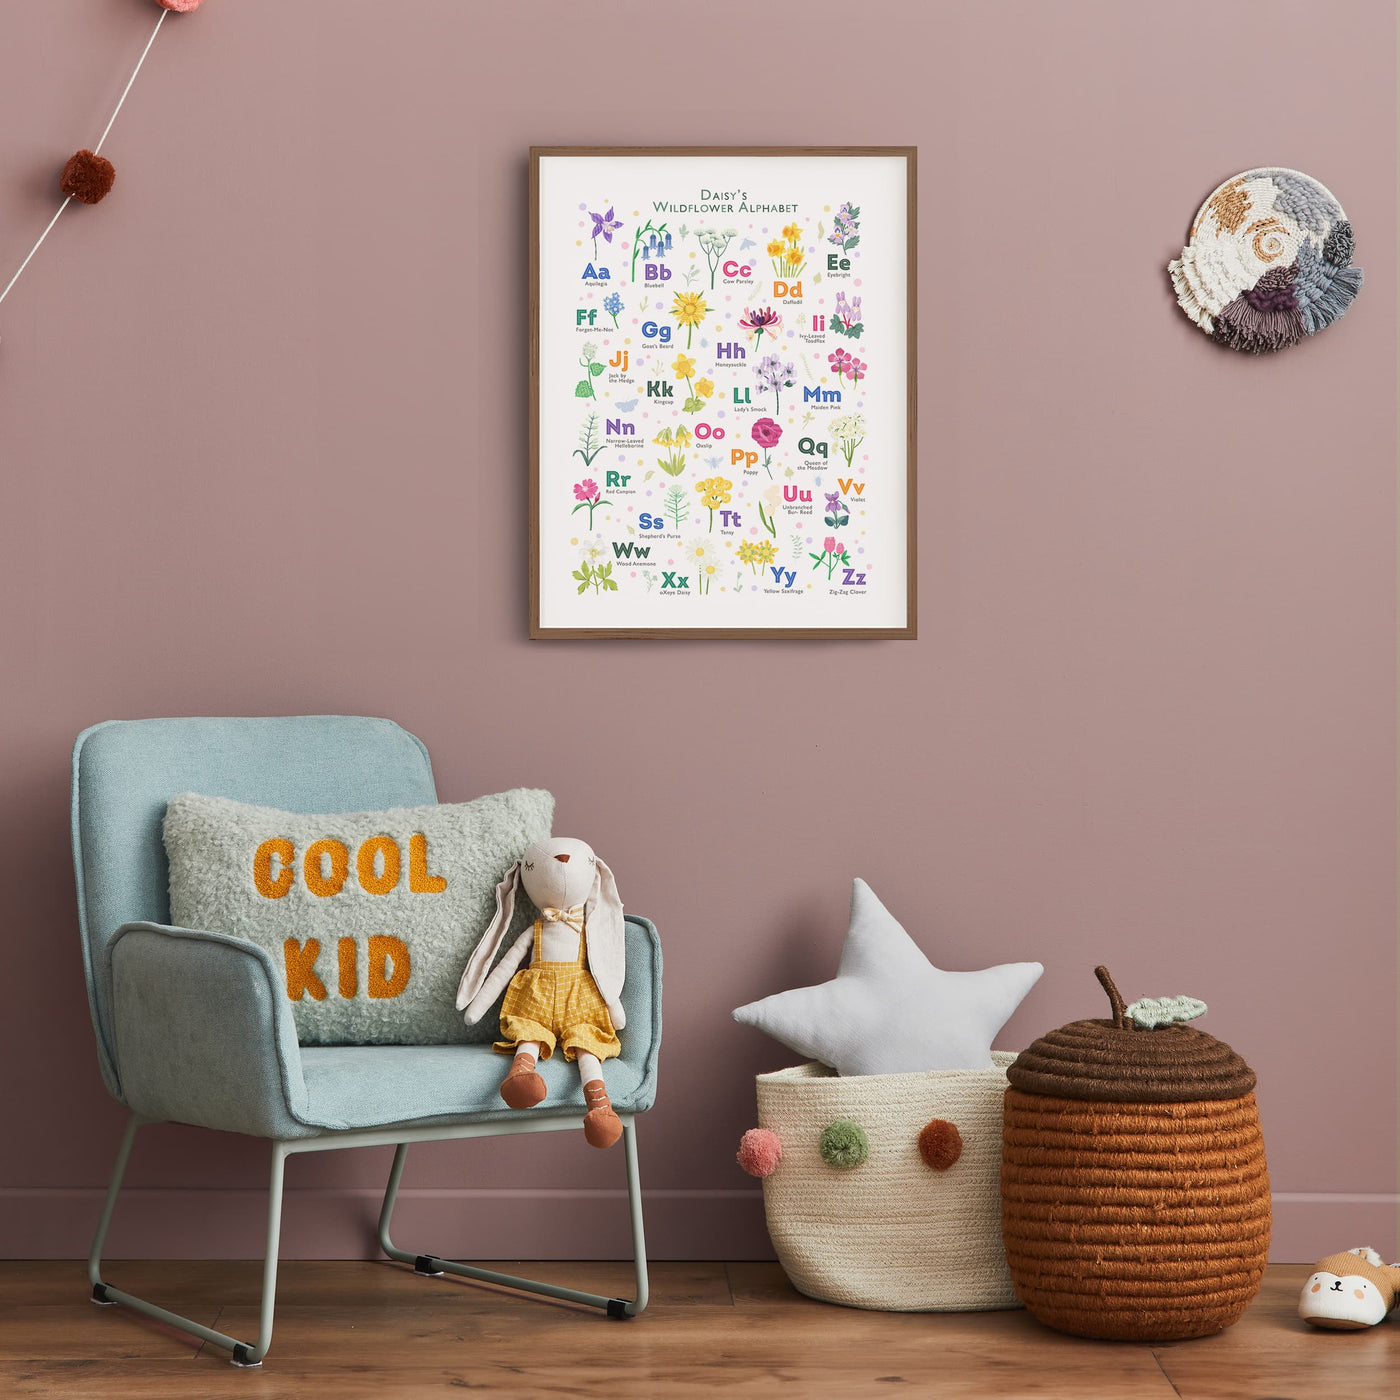 Image of a framed personalized wildflower alphabet print hanging on a dusky pink wall in a child's room